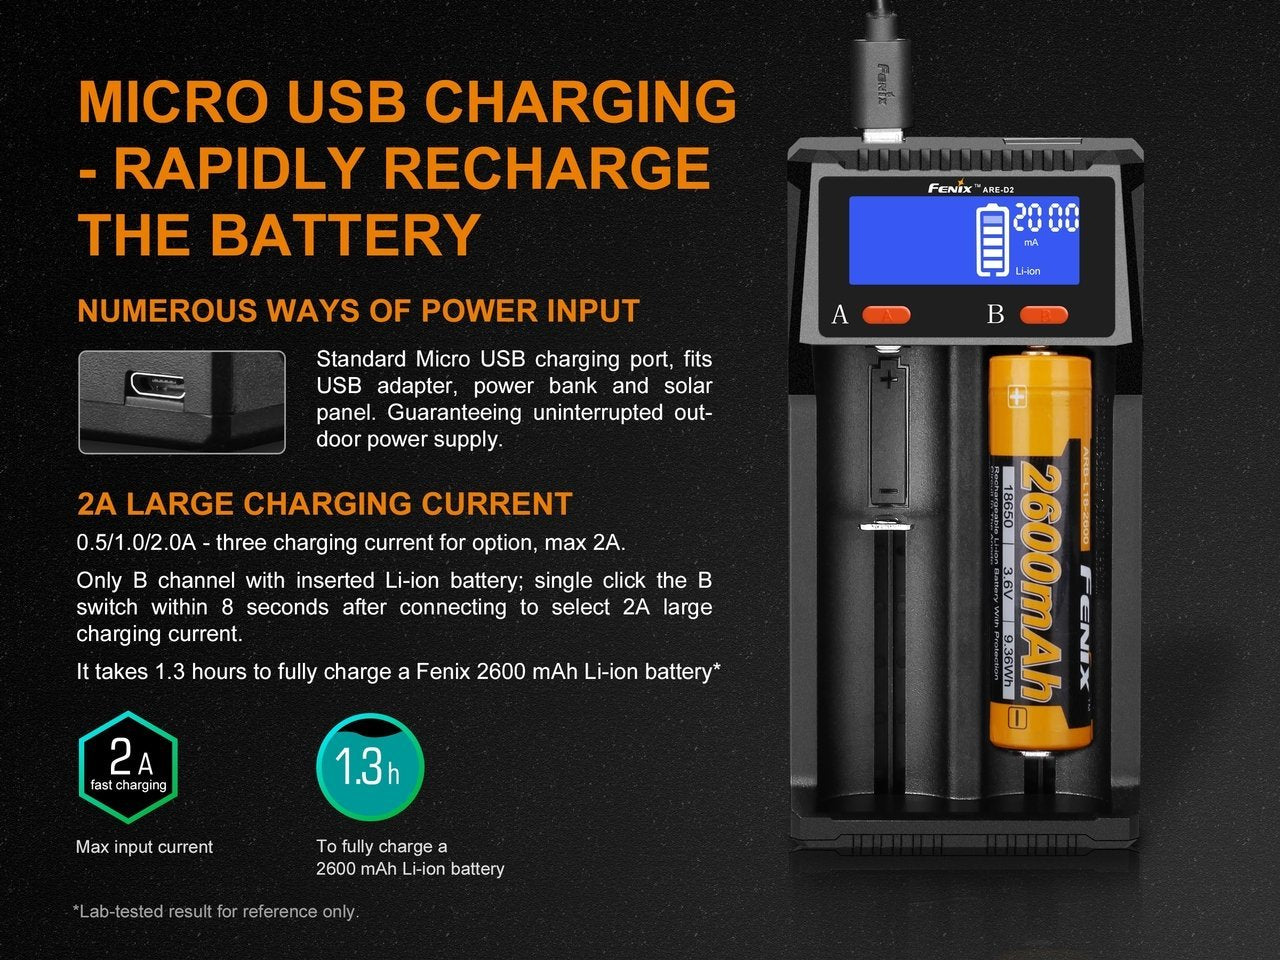 ARE-D2 rapid charging